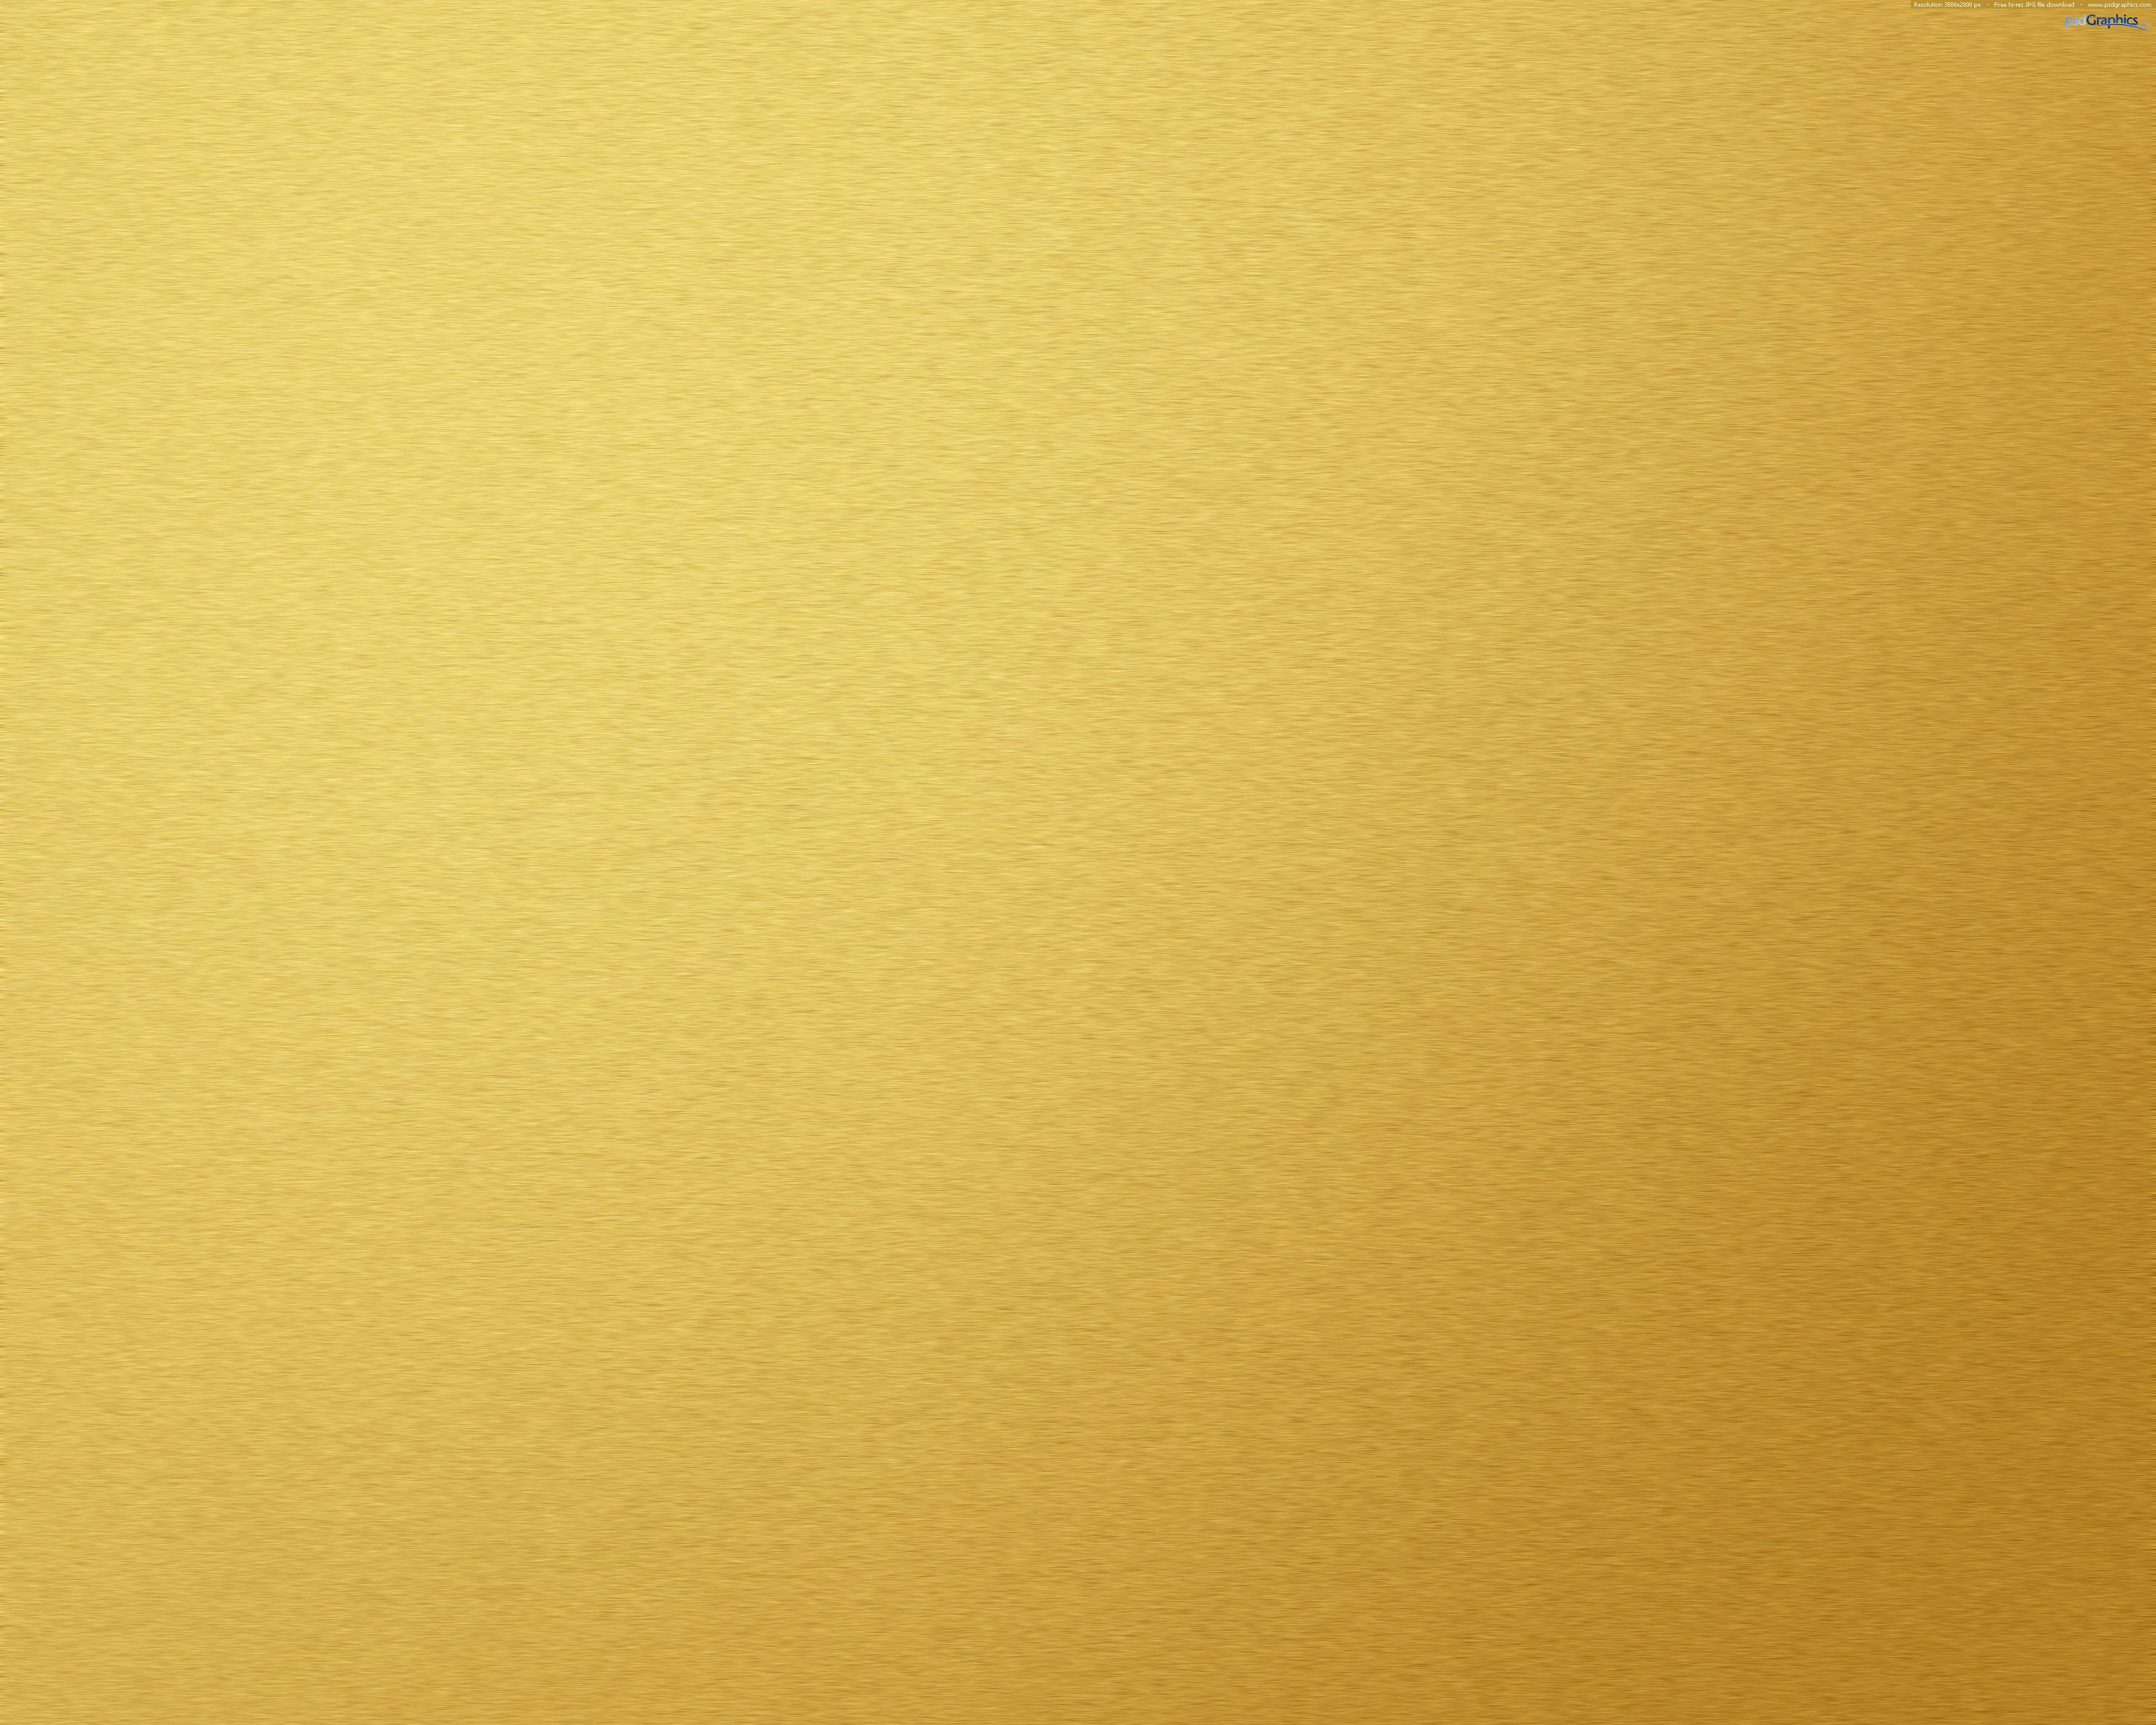 golden background HD 10. Background Check All